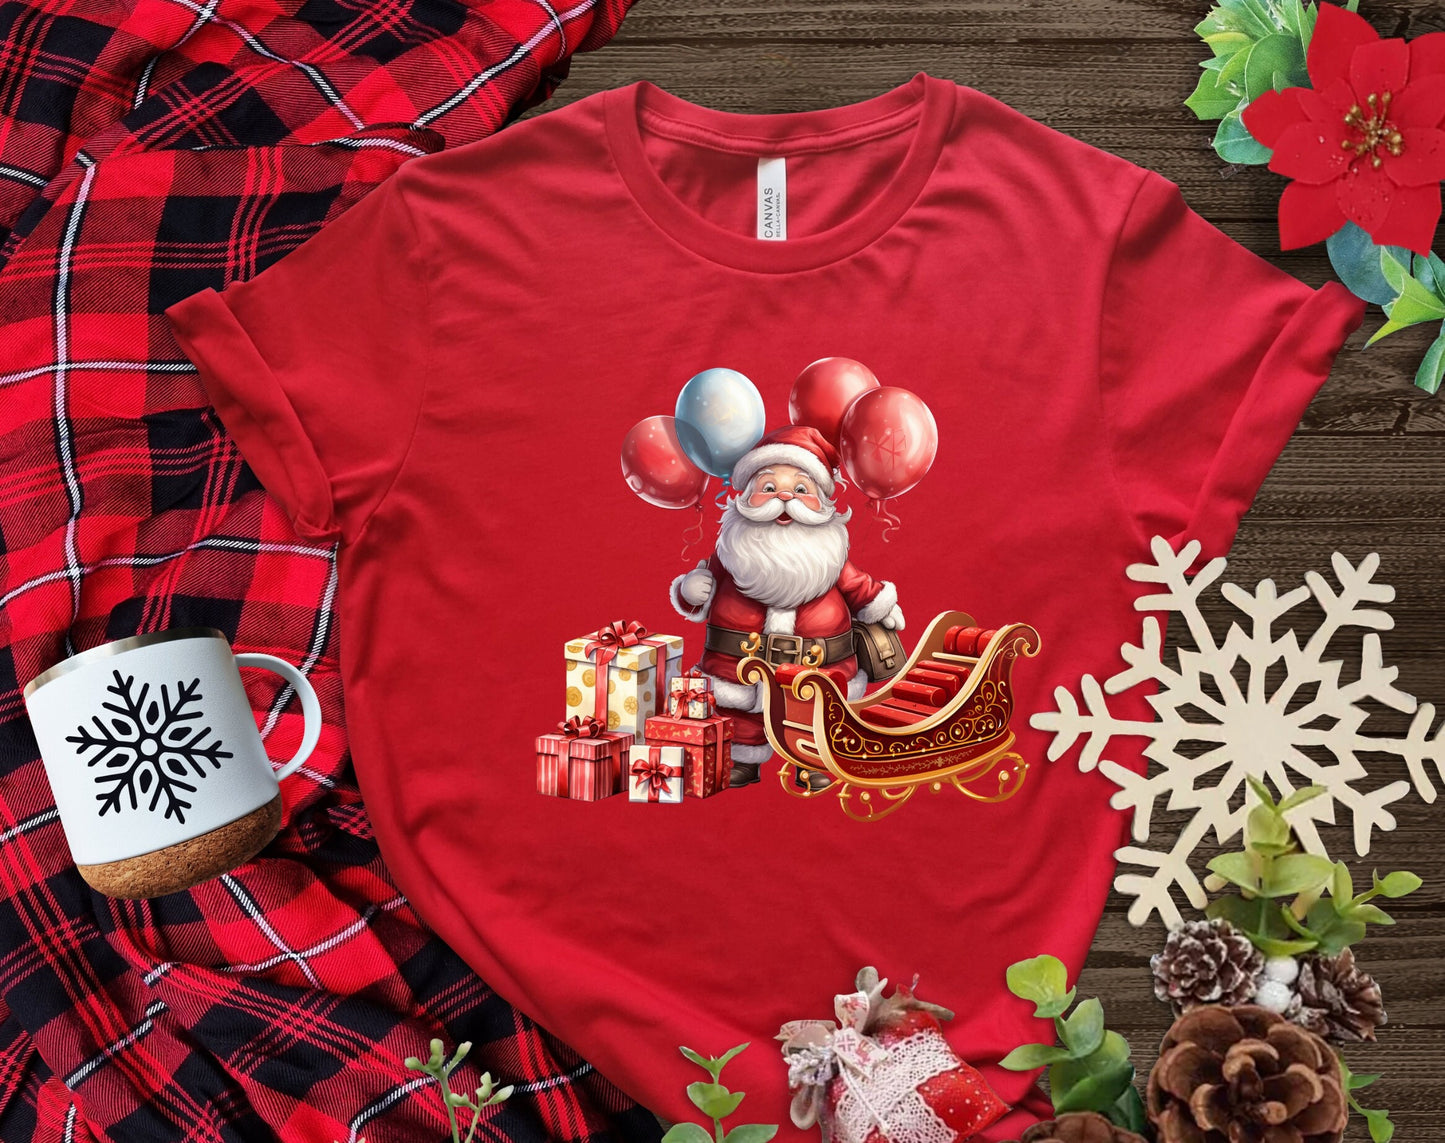 The Santas Sleigh with Presents T-Shirt. Makes the Perfect Gift for Friends, Family, Coworkers or yourself.  Check Out My Shop for even more Fun Designs.
www.scorpiontees.etsy.com